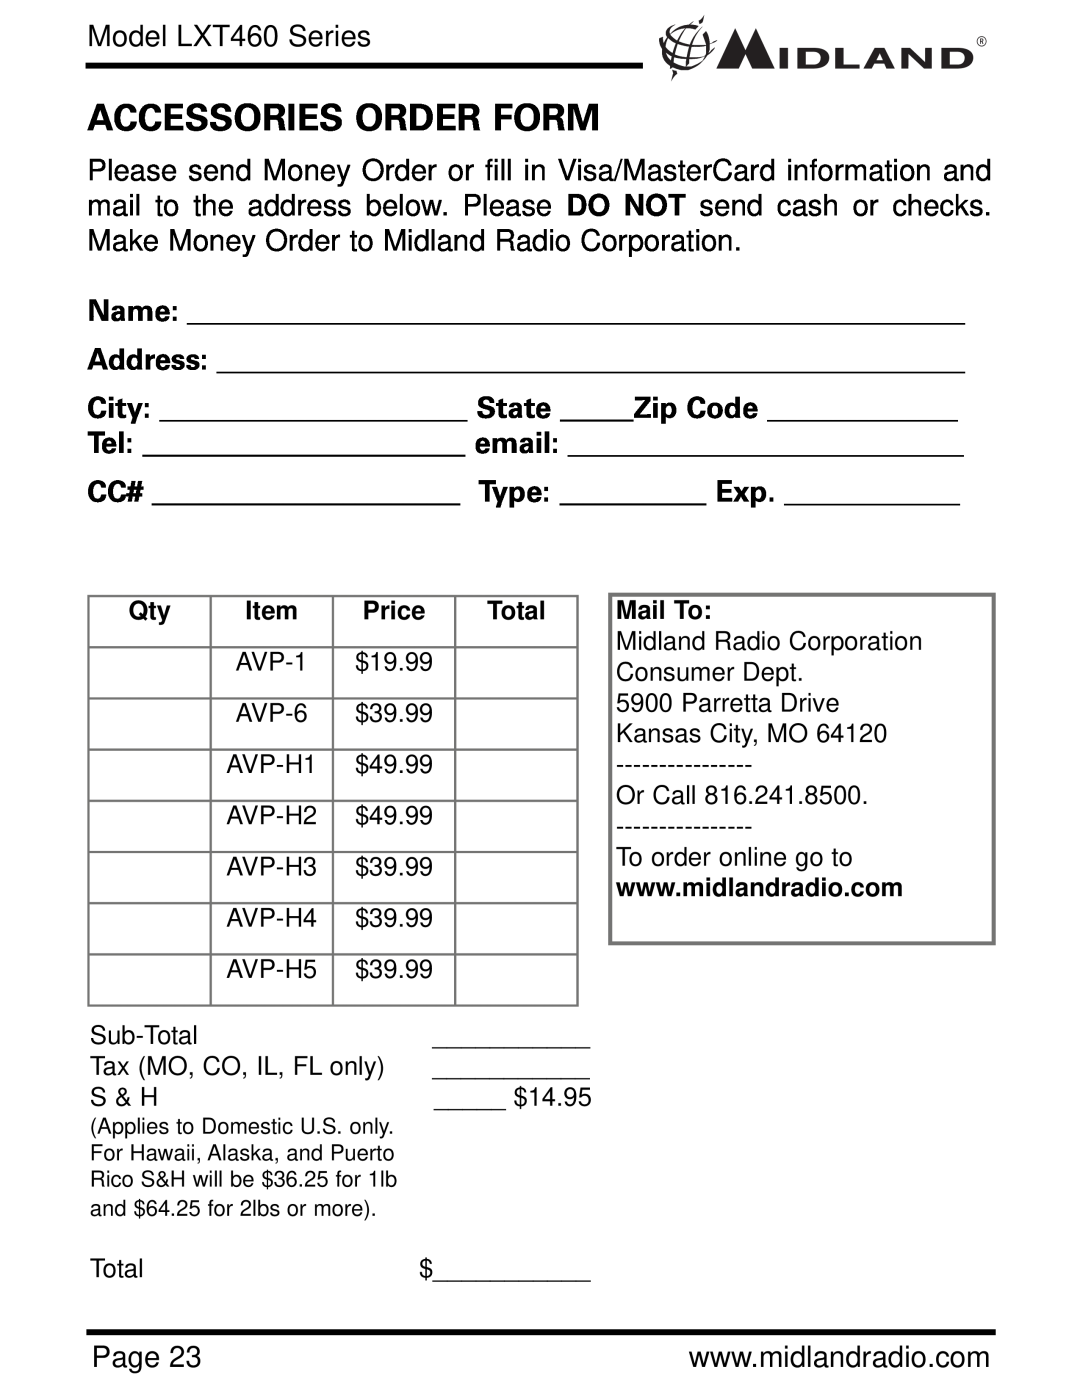 Midland Radio owner manual Accessories Order Form, Model LXT460 Series, Page 